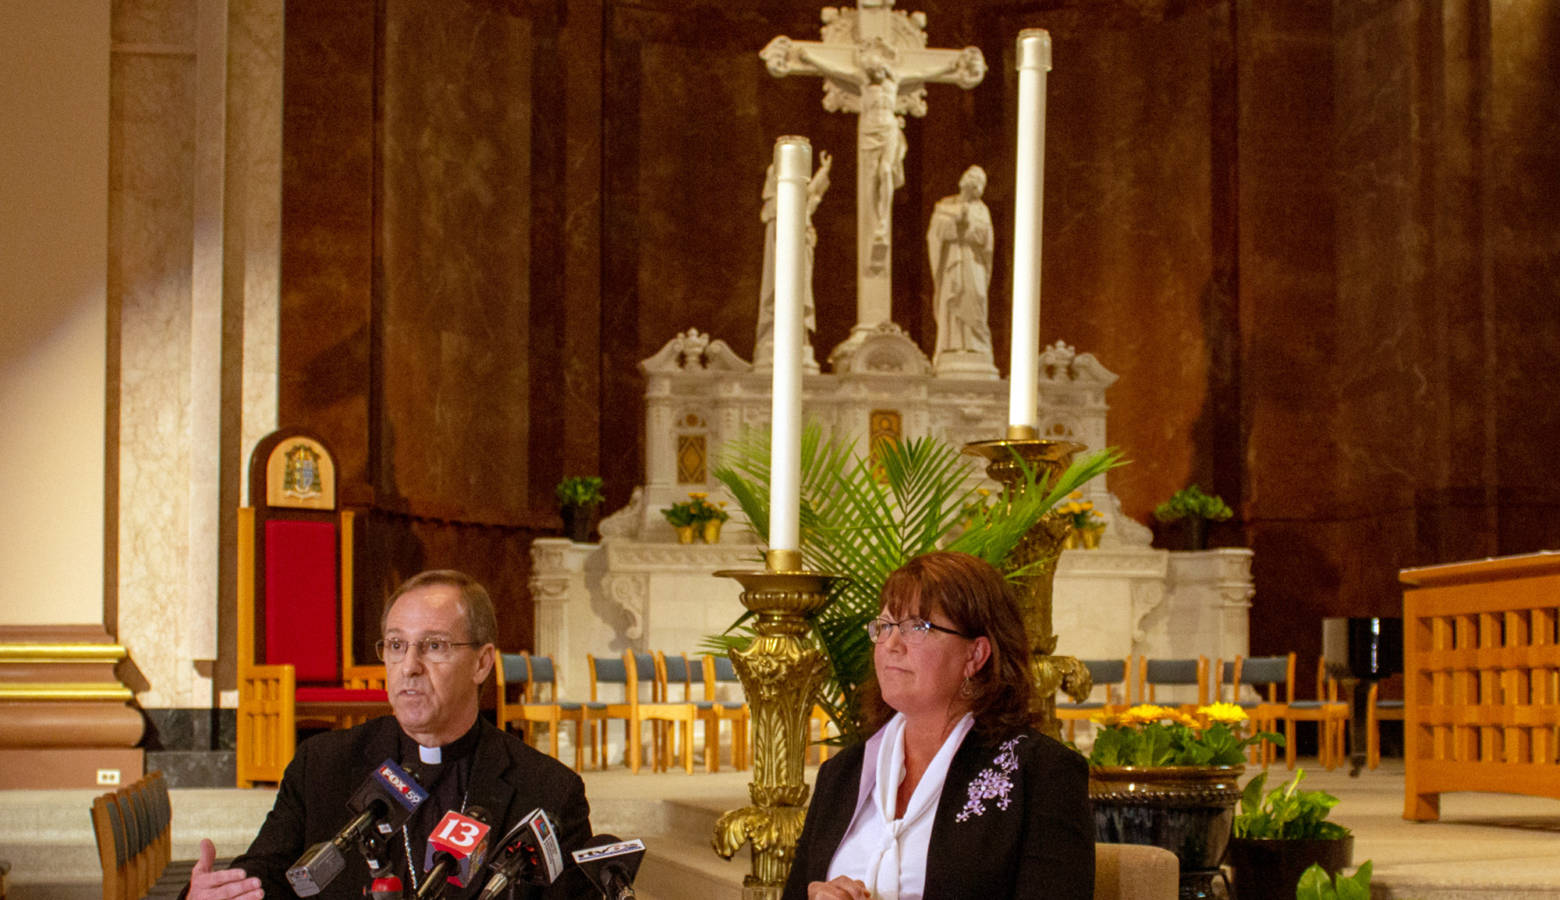 Archbishop Charles Thompson and Superintendent of Catholic Schools Gina Fleming defend the Archdiocese's policy on LGBTQ teachers at Catholics schools. (Evan Robbins/WFYI News)